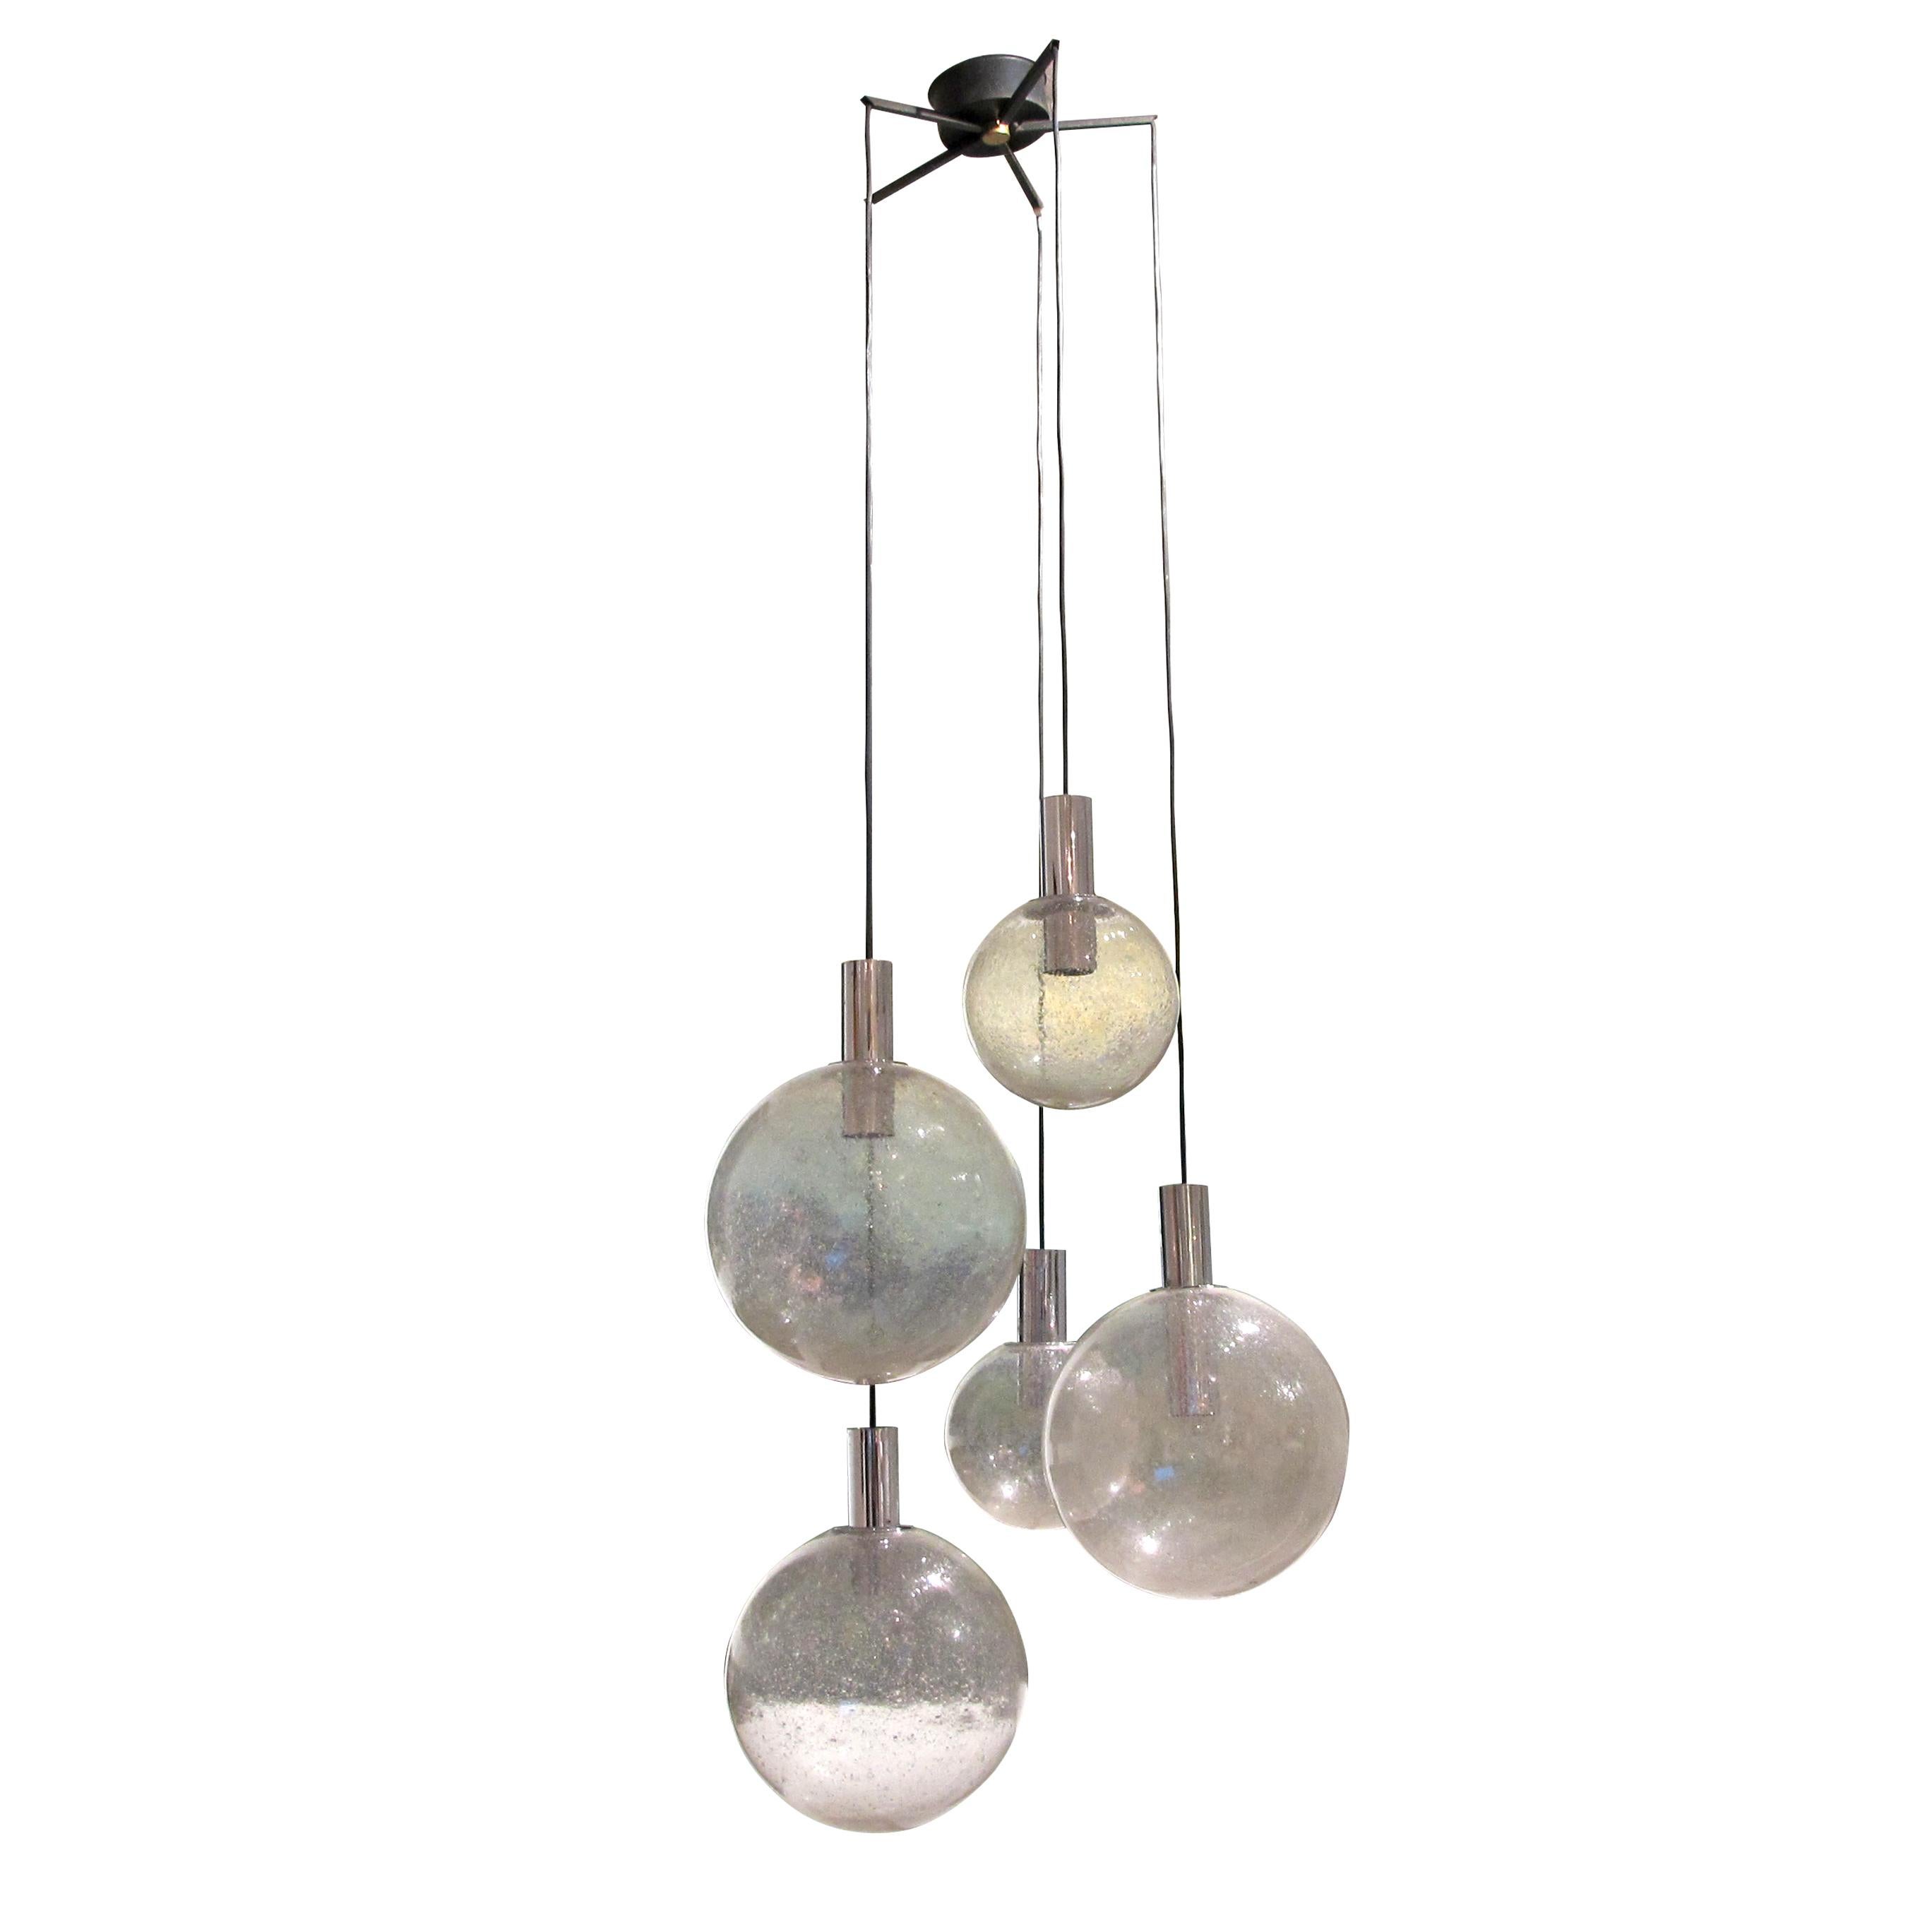 This 1960s large pendant light by Doria Leuchten is a perfect example of the mid-century modern style. The light features six hand-blown glass globes in various sizes and shapes, which are suspended from black wires on a chrome-finished metal frame.